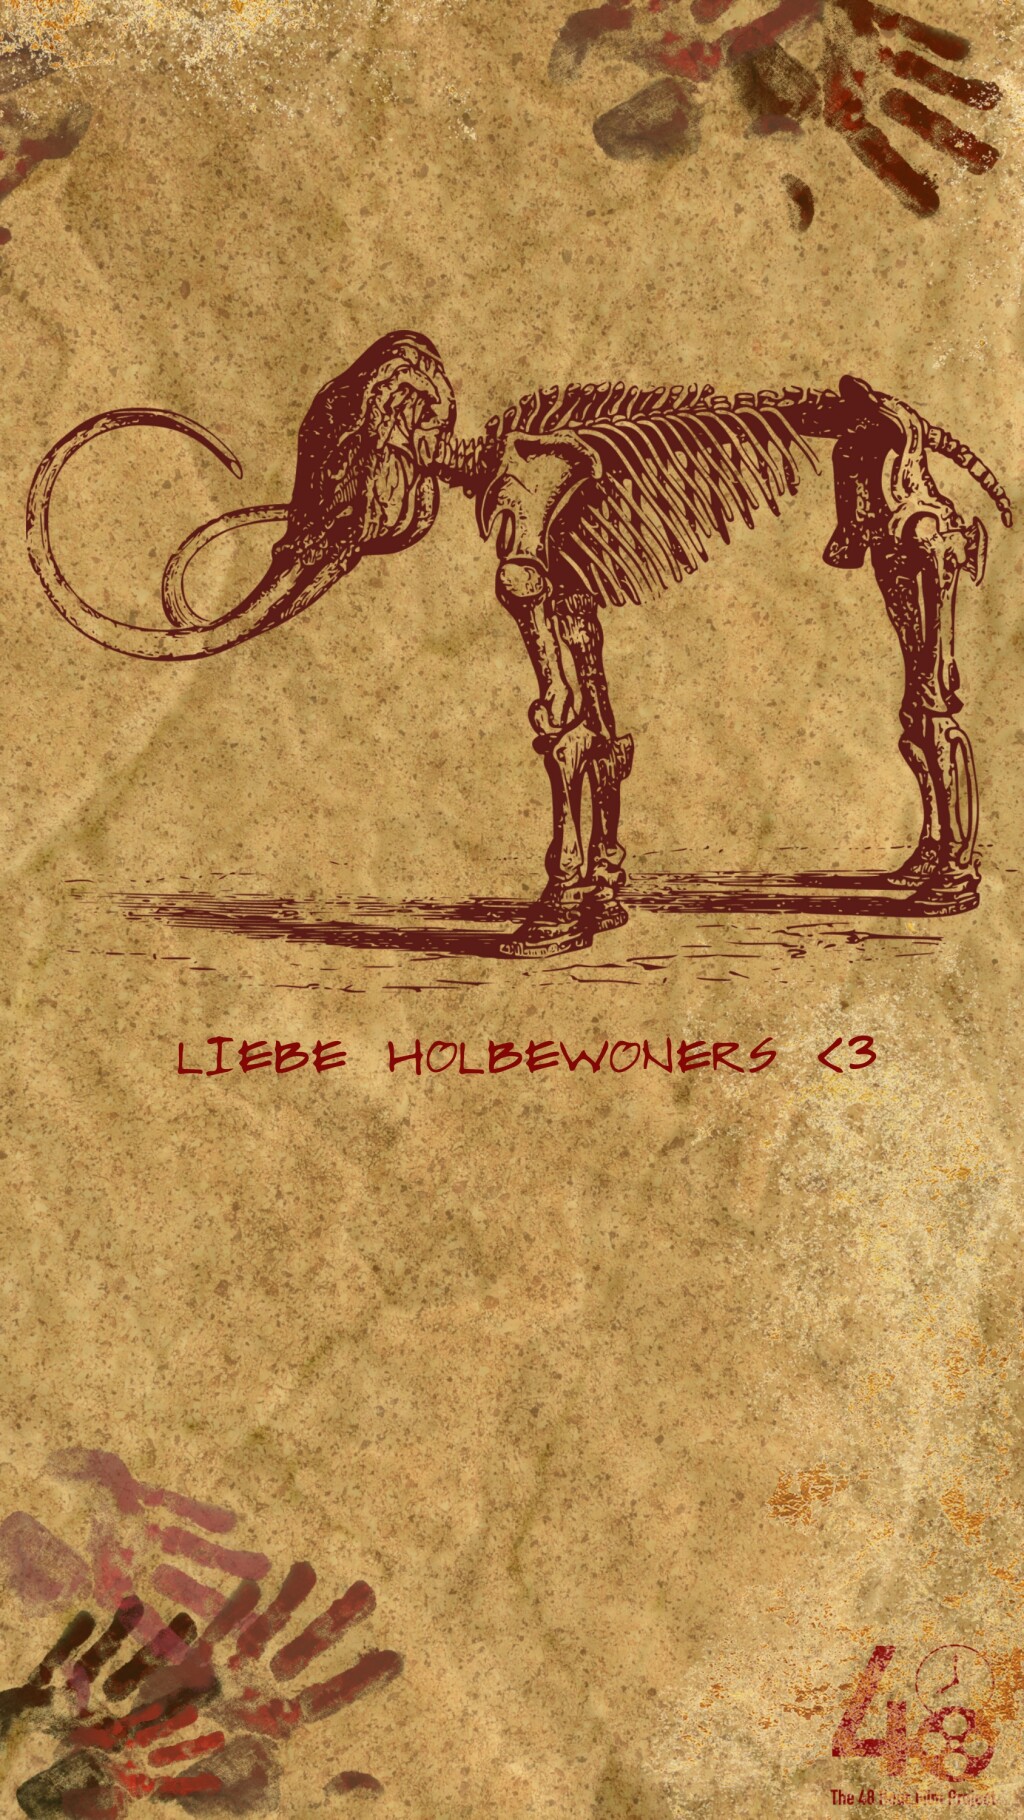 Filmposter for Liebe Holbewoners